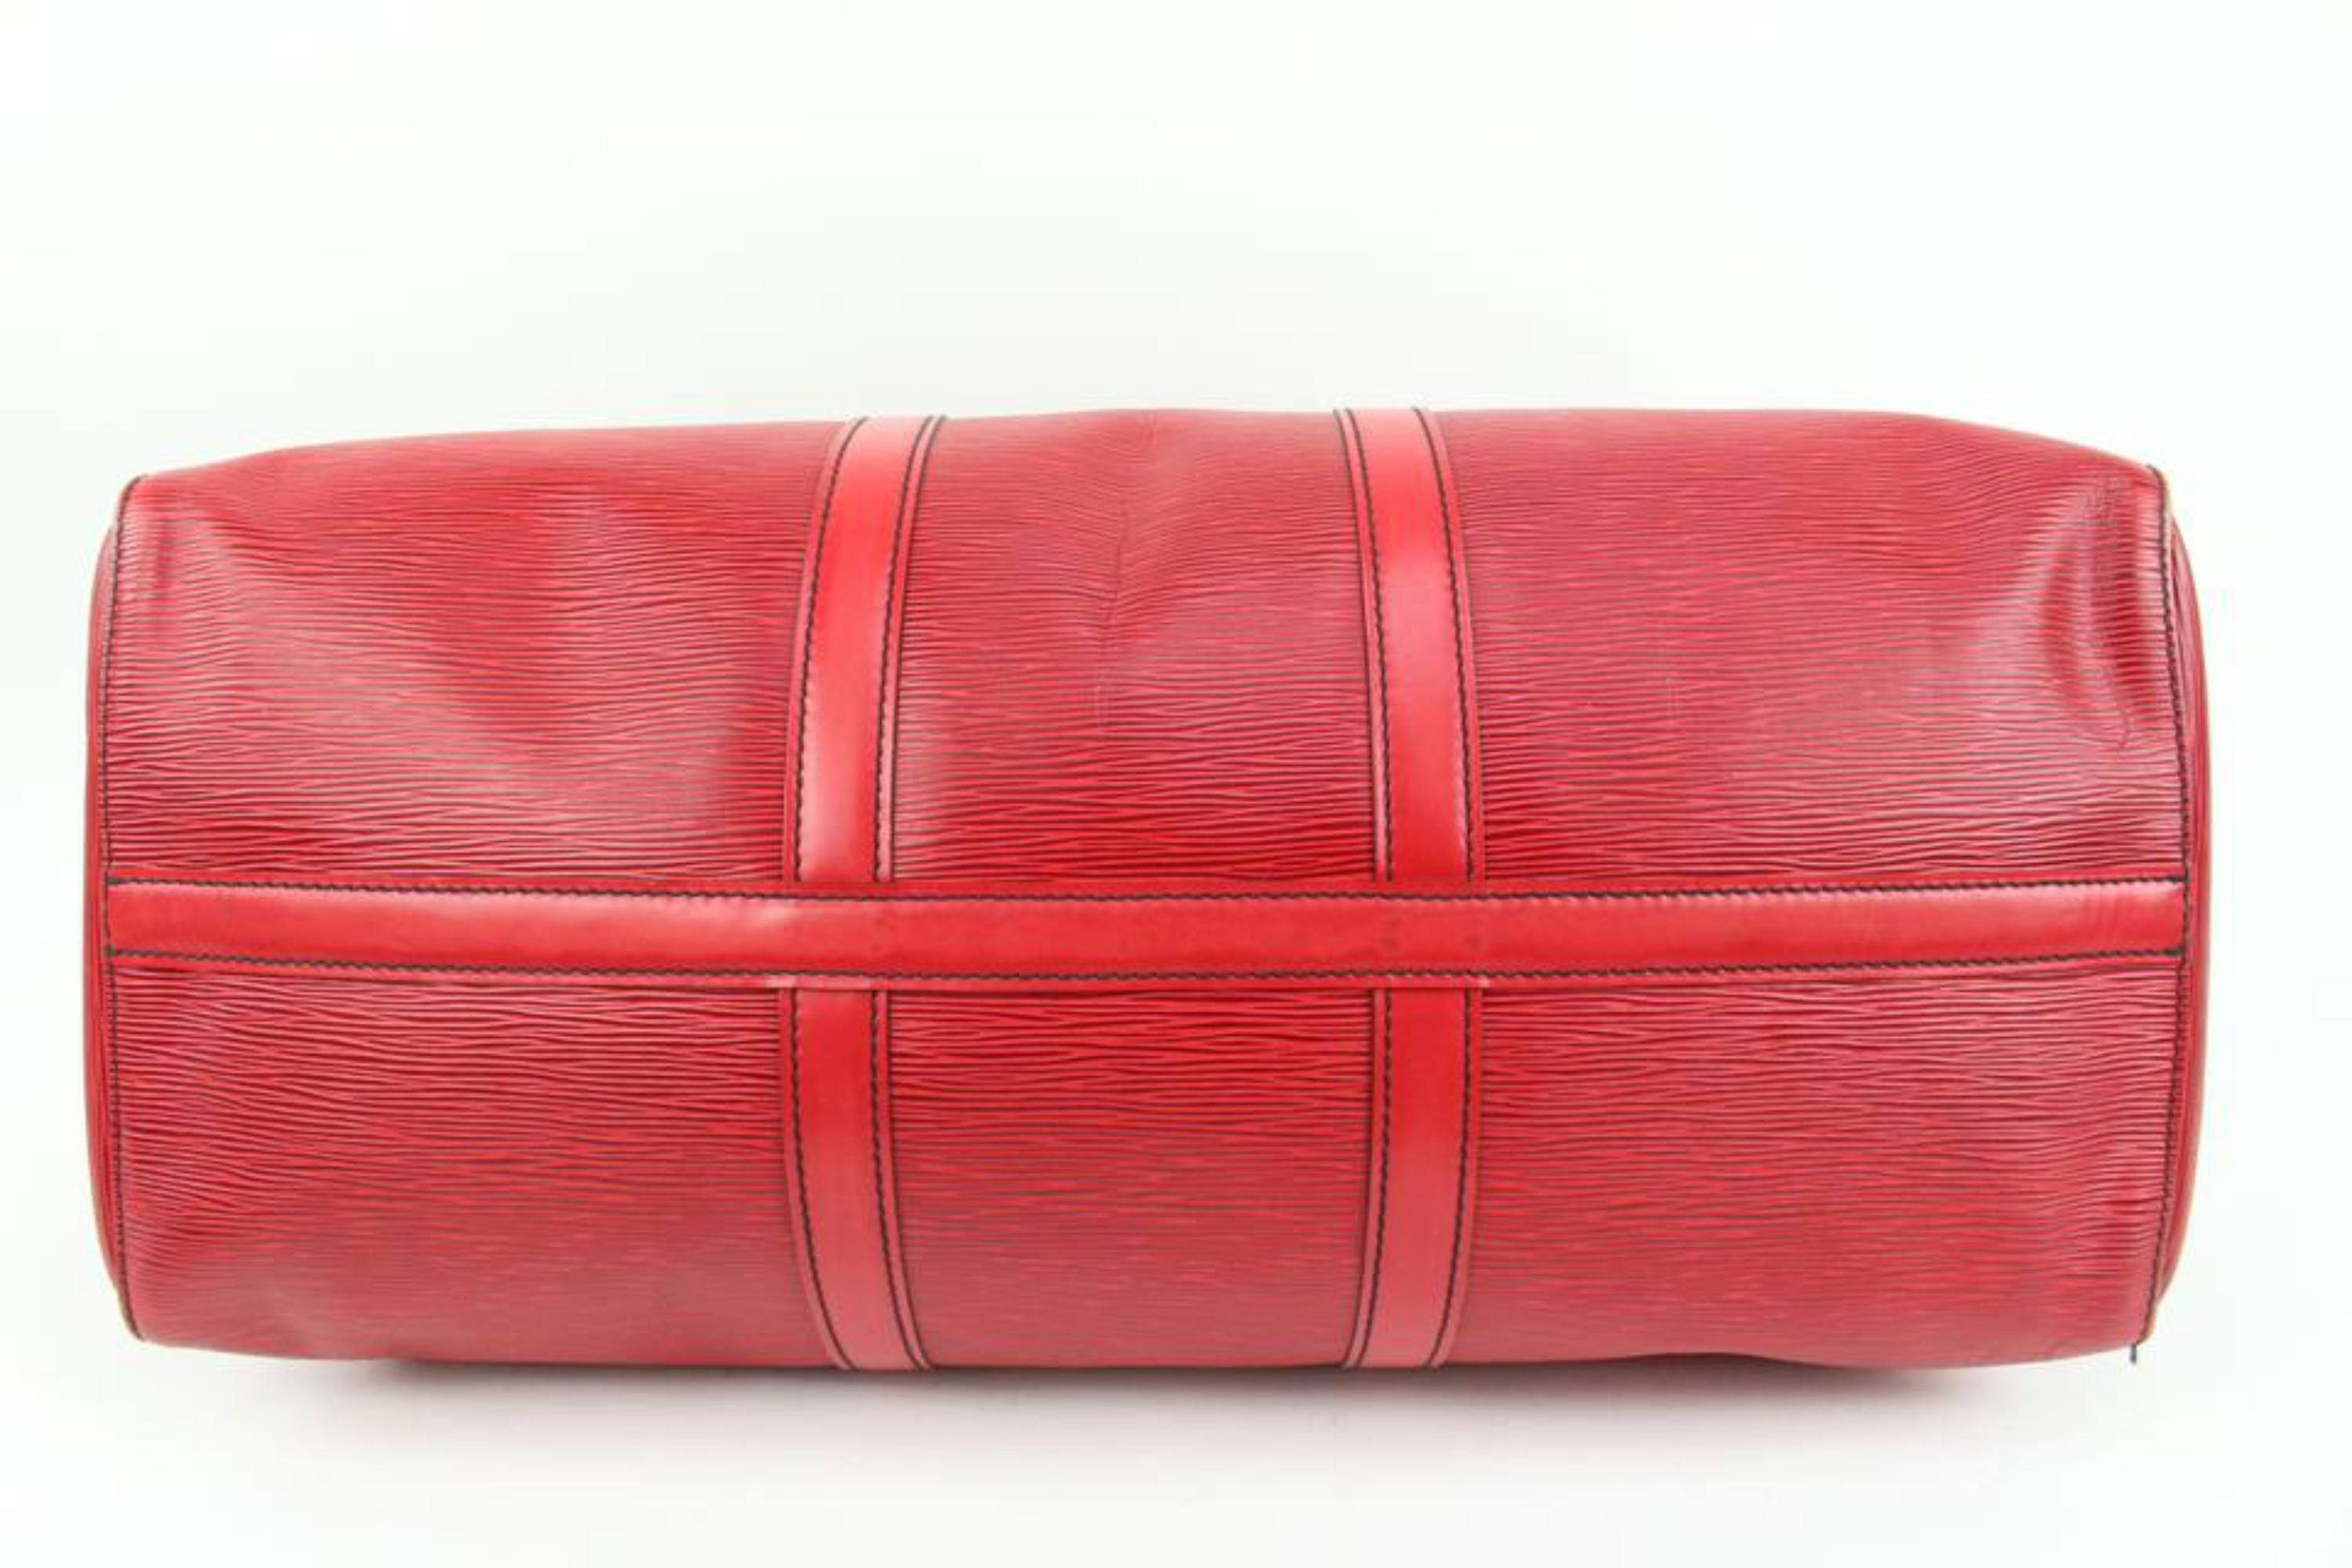 Louis Vuitton Red Epi Leather Keepall 50 Duffle Bag 89lk328s For Sale 1